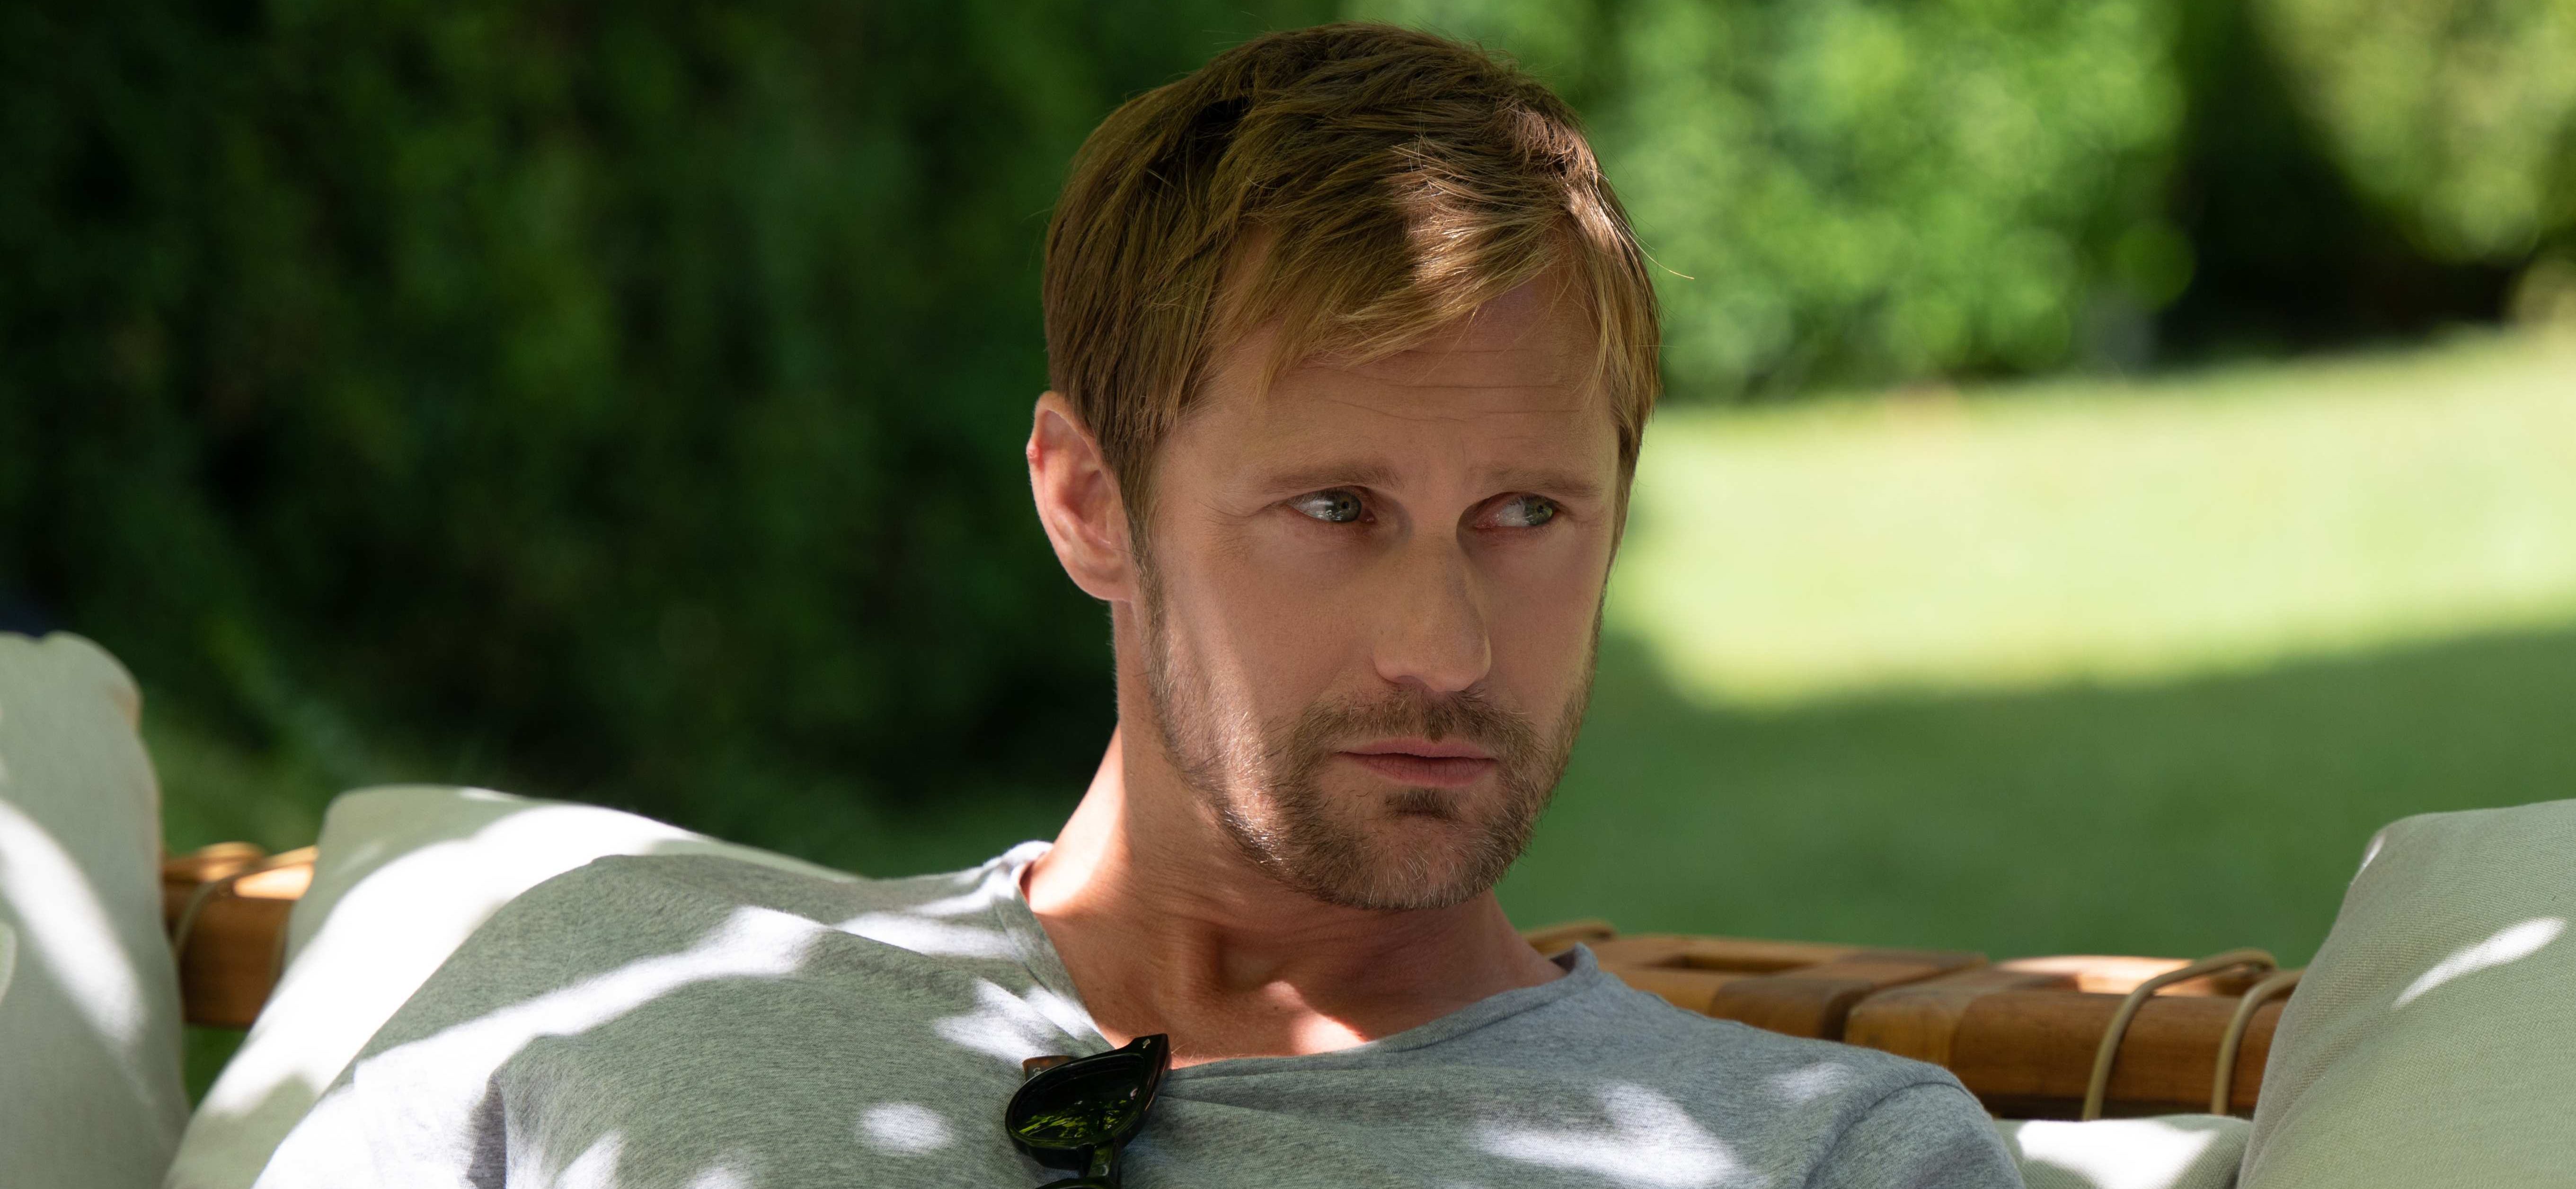 Alexander Skarsgård: All New Movies and TV Shows in 2023 and 2024